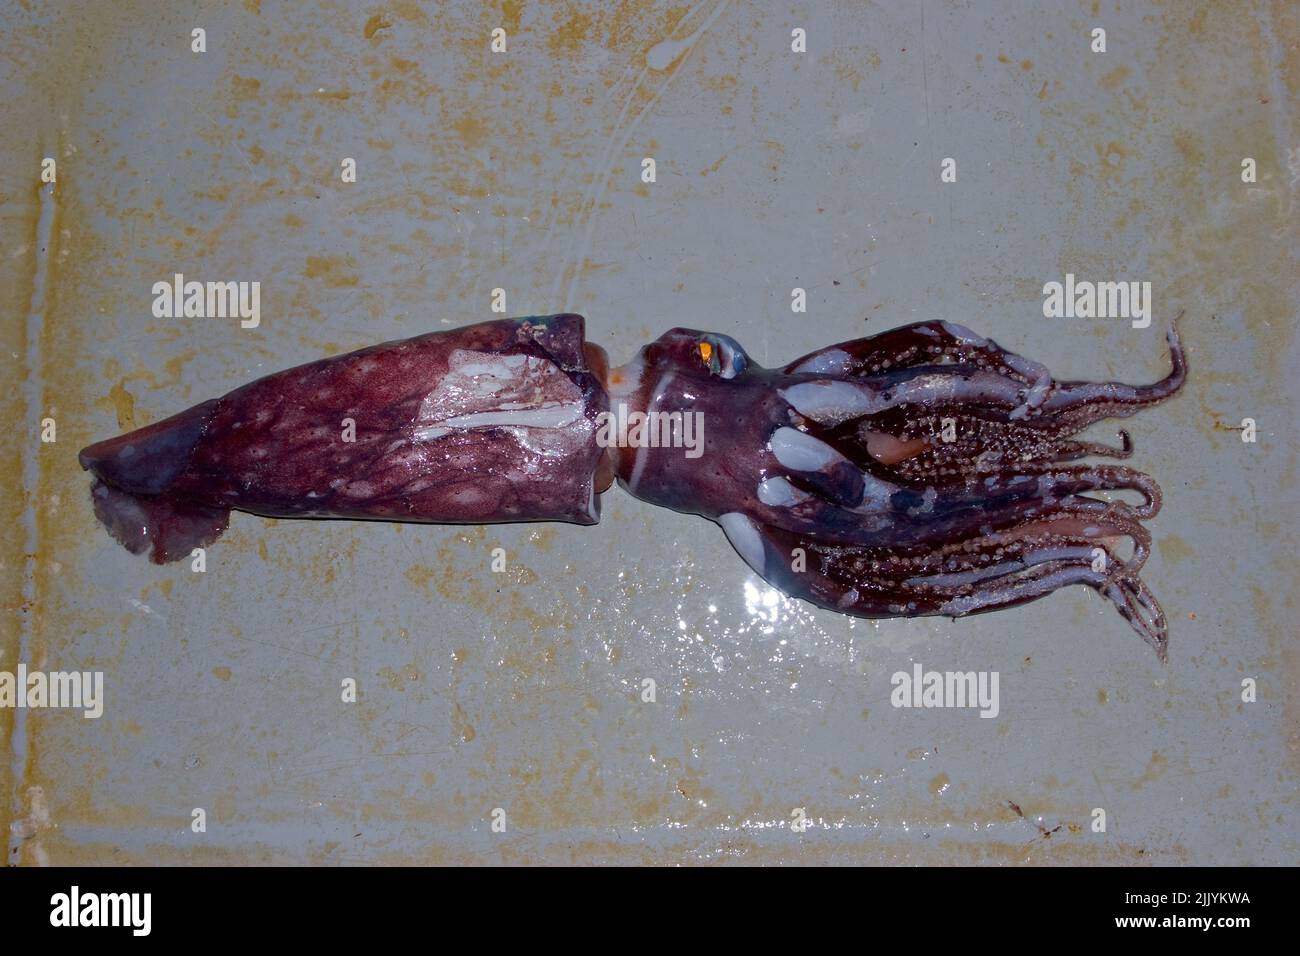 A Look at life in New Zealand: Freshly landed catch (Jewel Squid: Histioteuthis), from a deep-sea trawl. Stock Photo